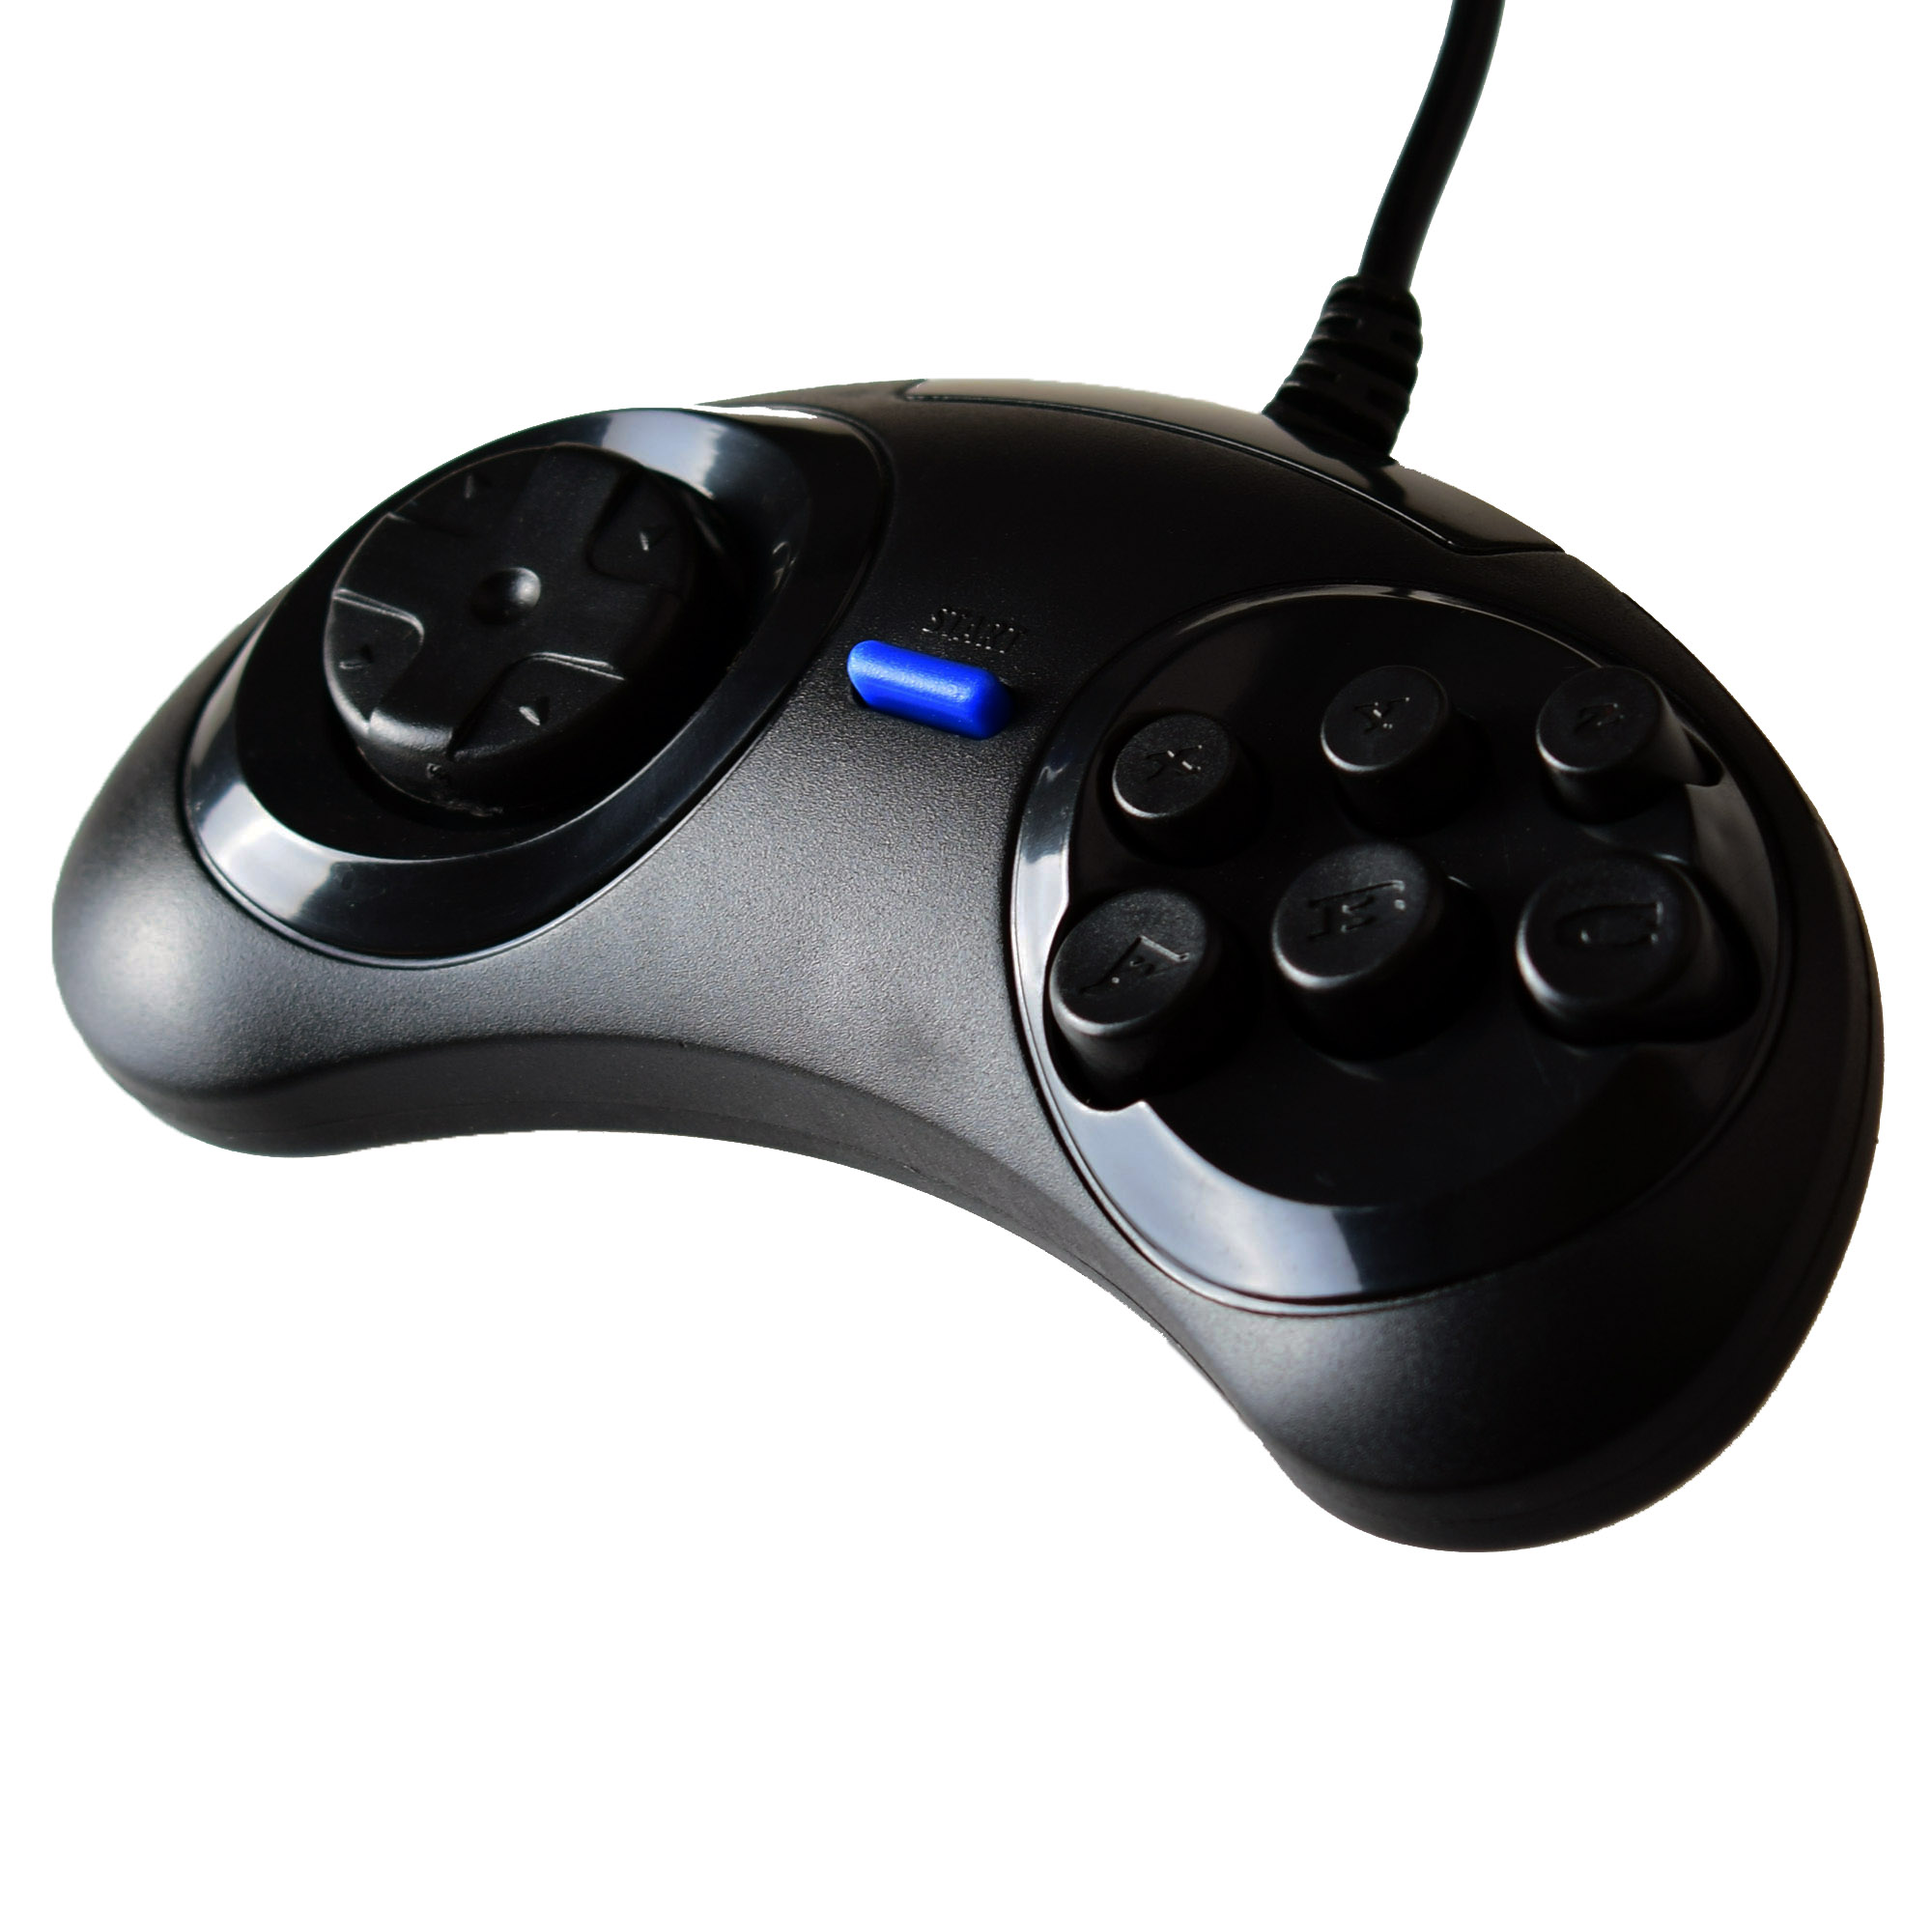 USB 6 BUTTON WIRED SEGA GENESIS CONTROLLER GAMEPAD FOR PC ...